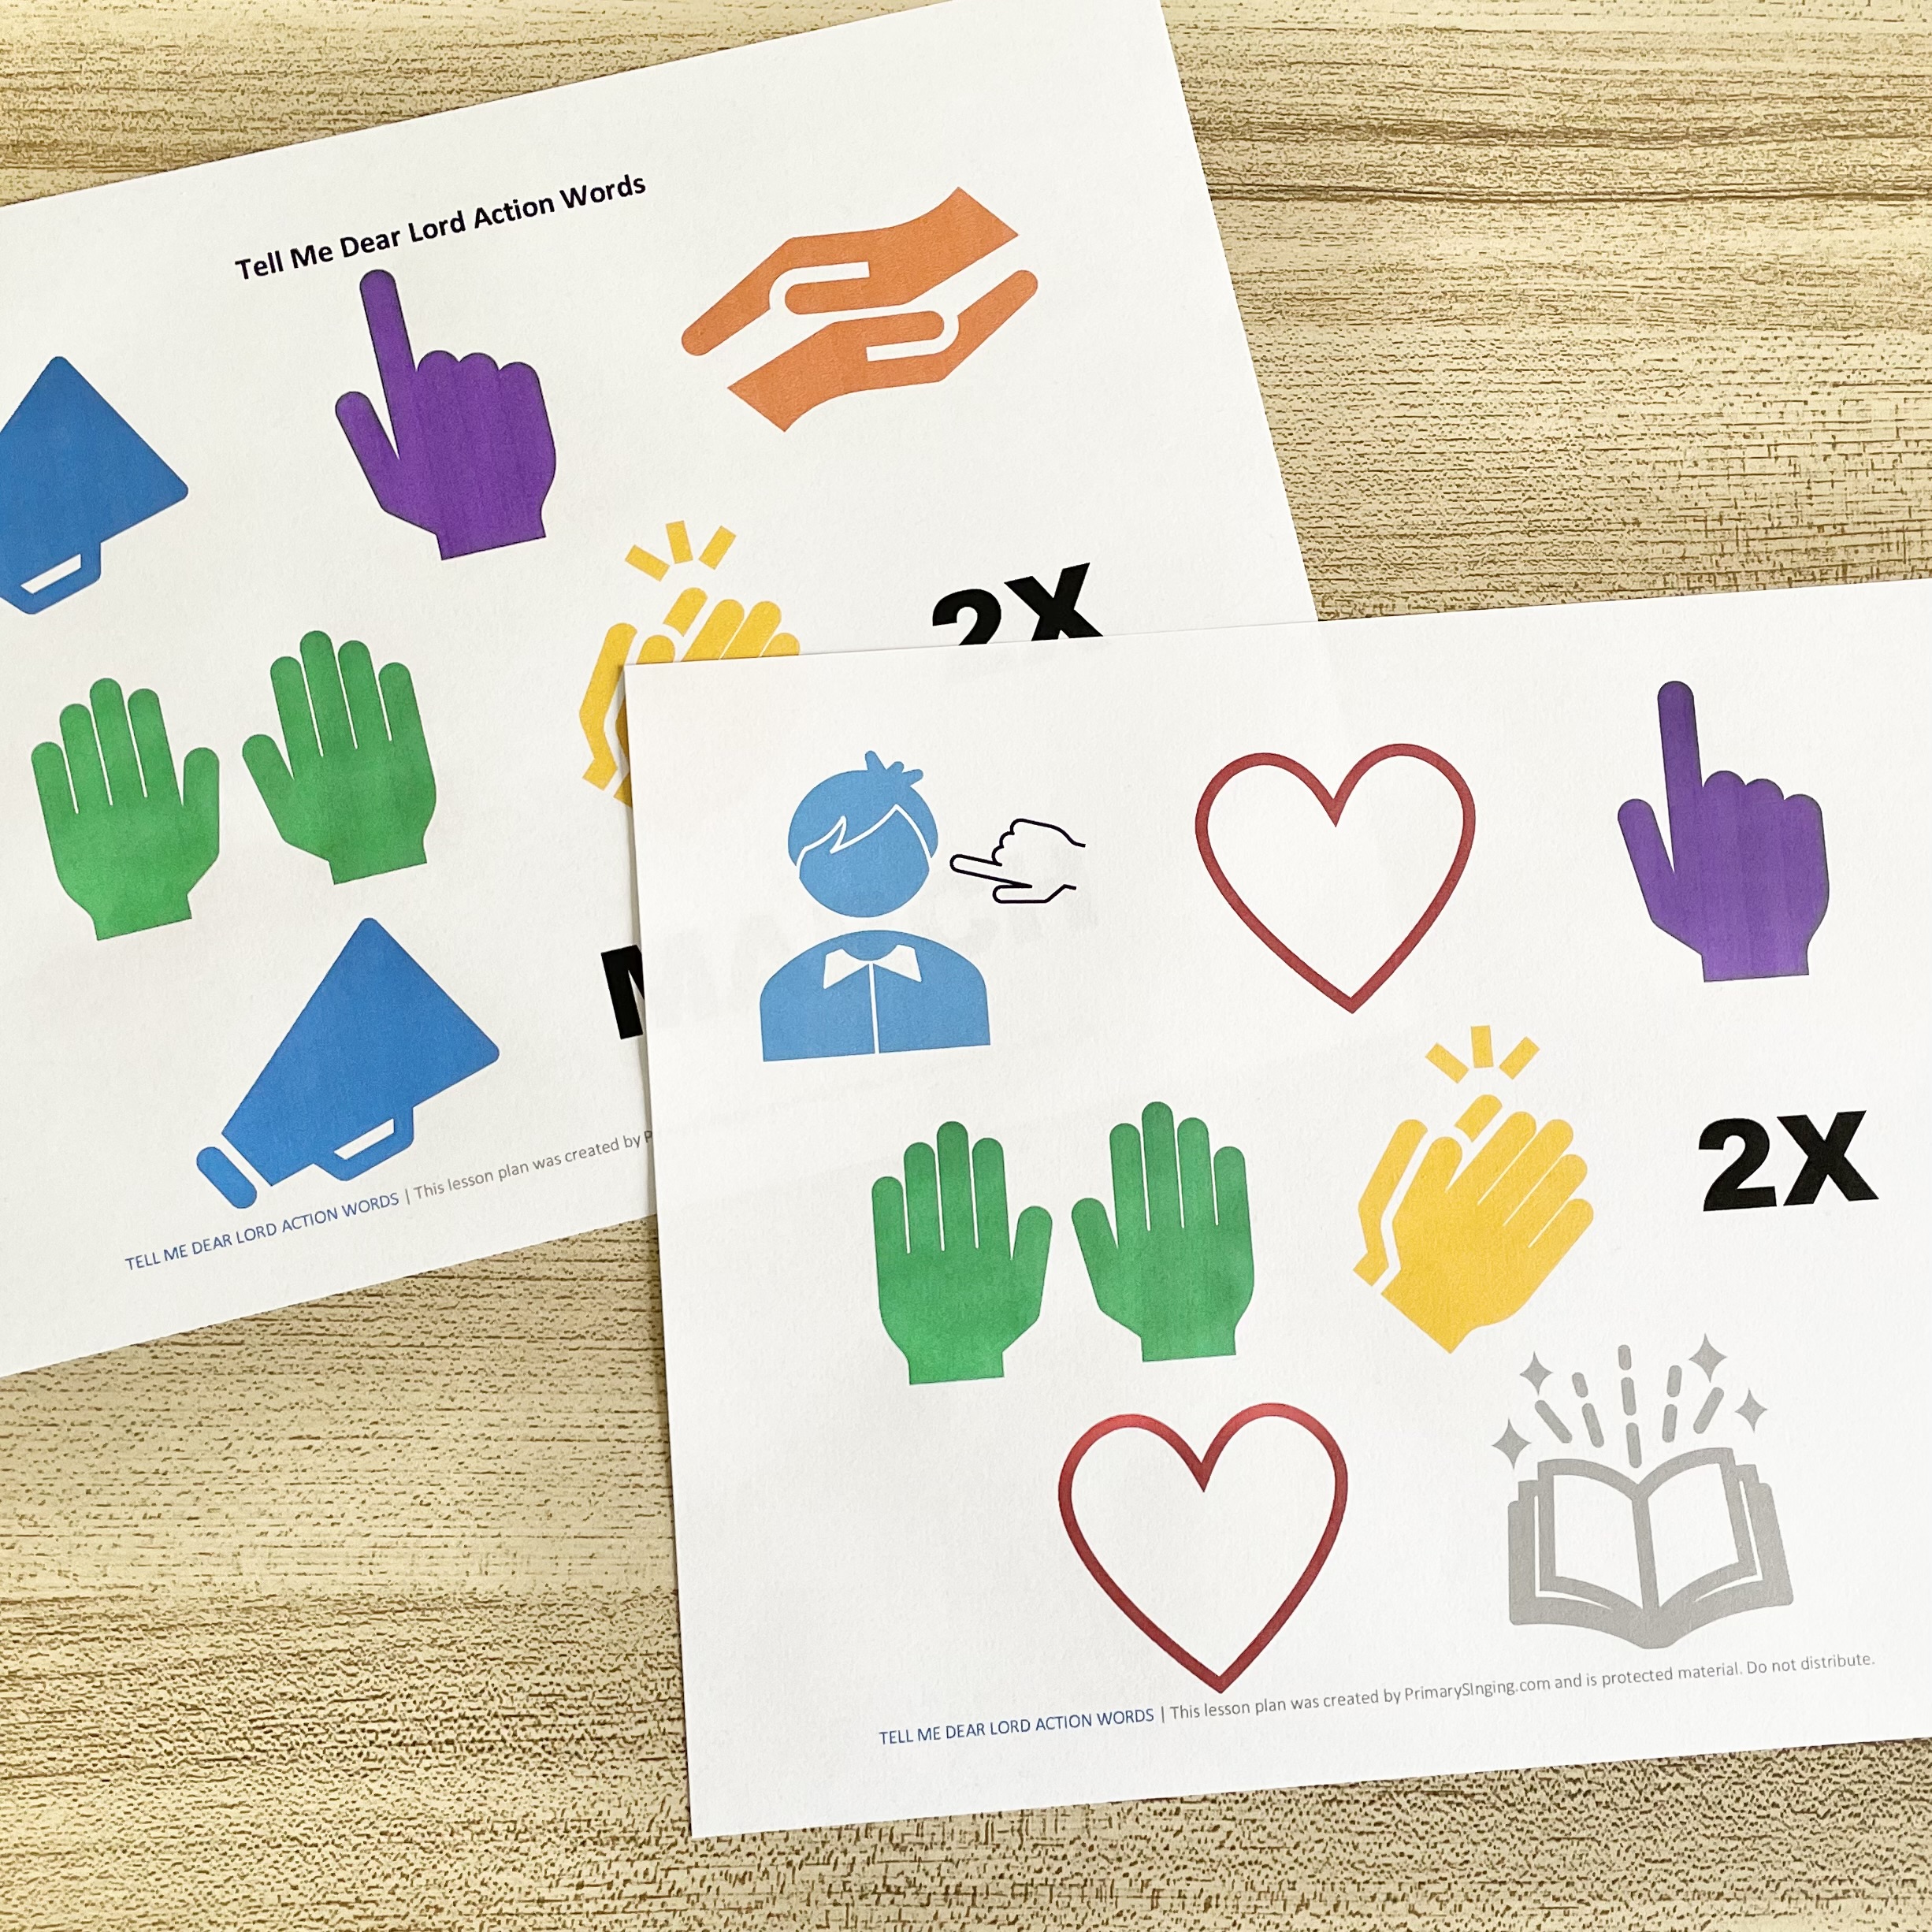 Tell Me Dear Lord Action Words! Use these hand actions for a fun way to teach this Come Follow Me New Testament song with printable song helps for LDS Pimrayr Music Leaders.